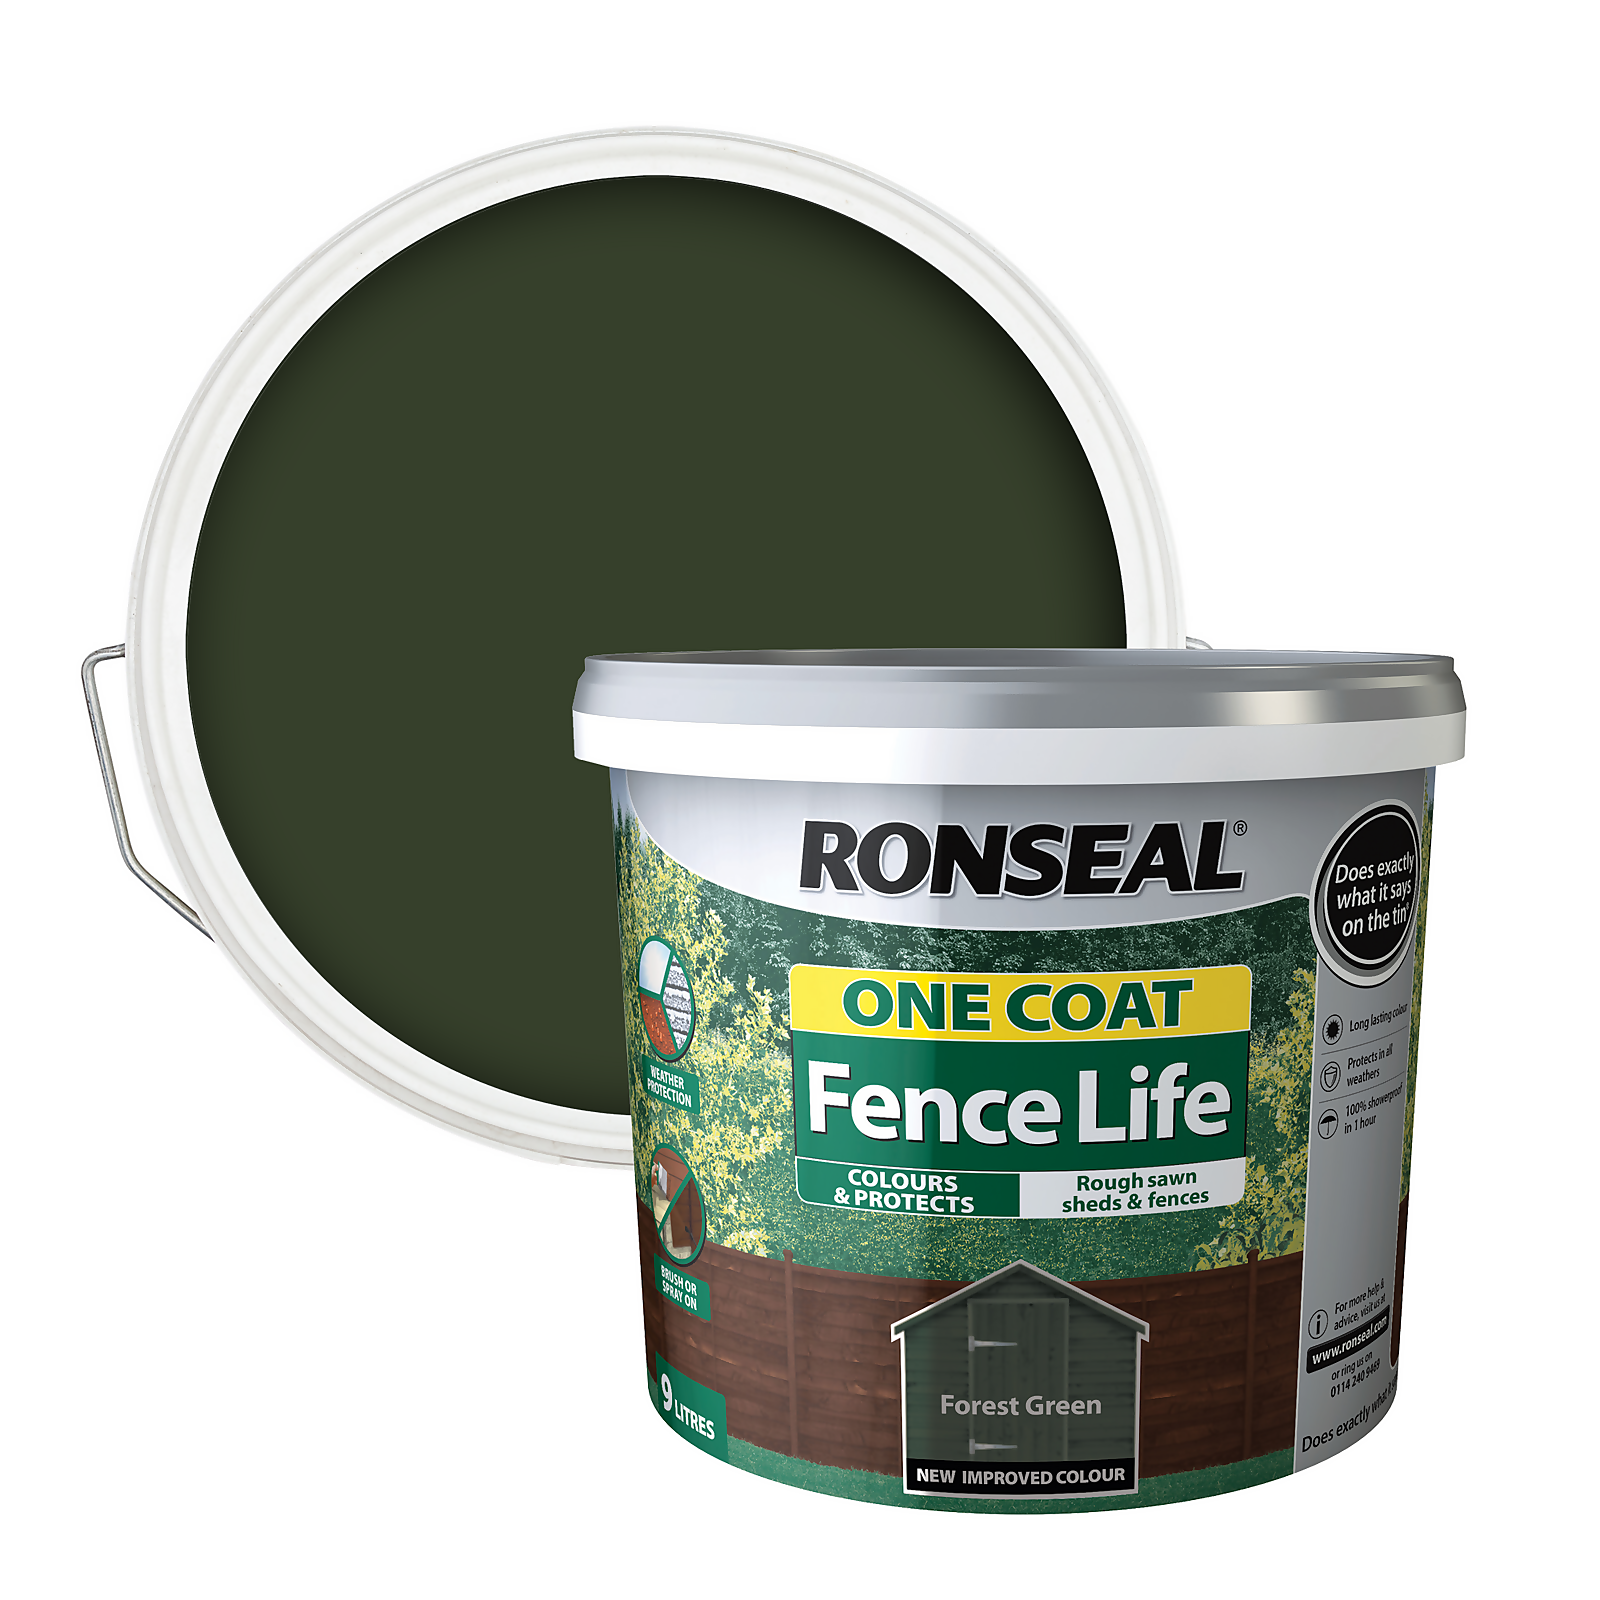 Ronseal One Coat Fence Life Paint Forest Green - 9L